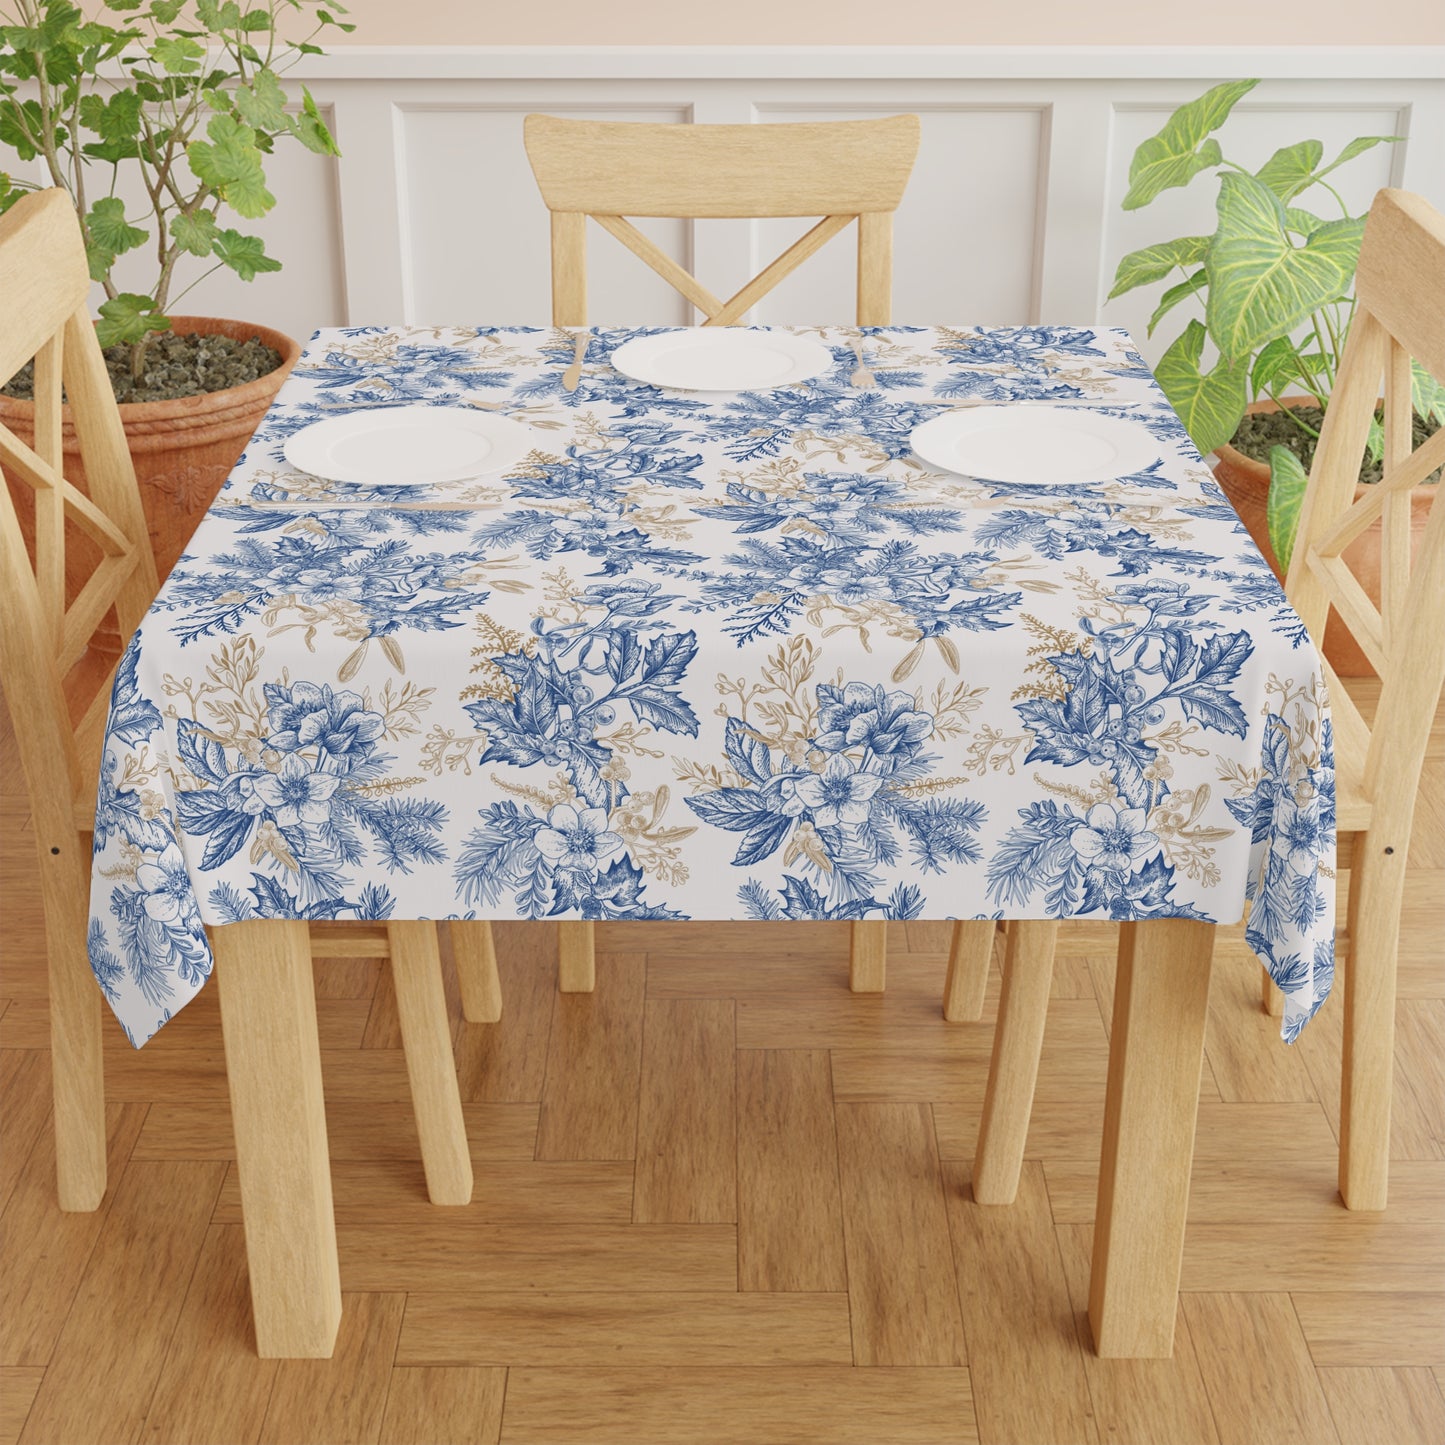 Winter Hellebore Flowers Tablecloth